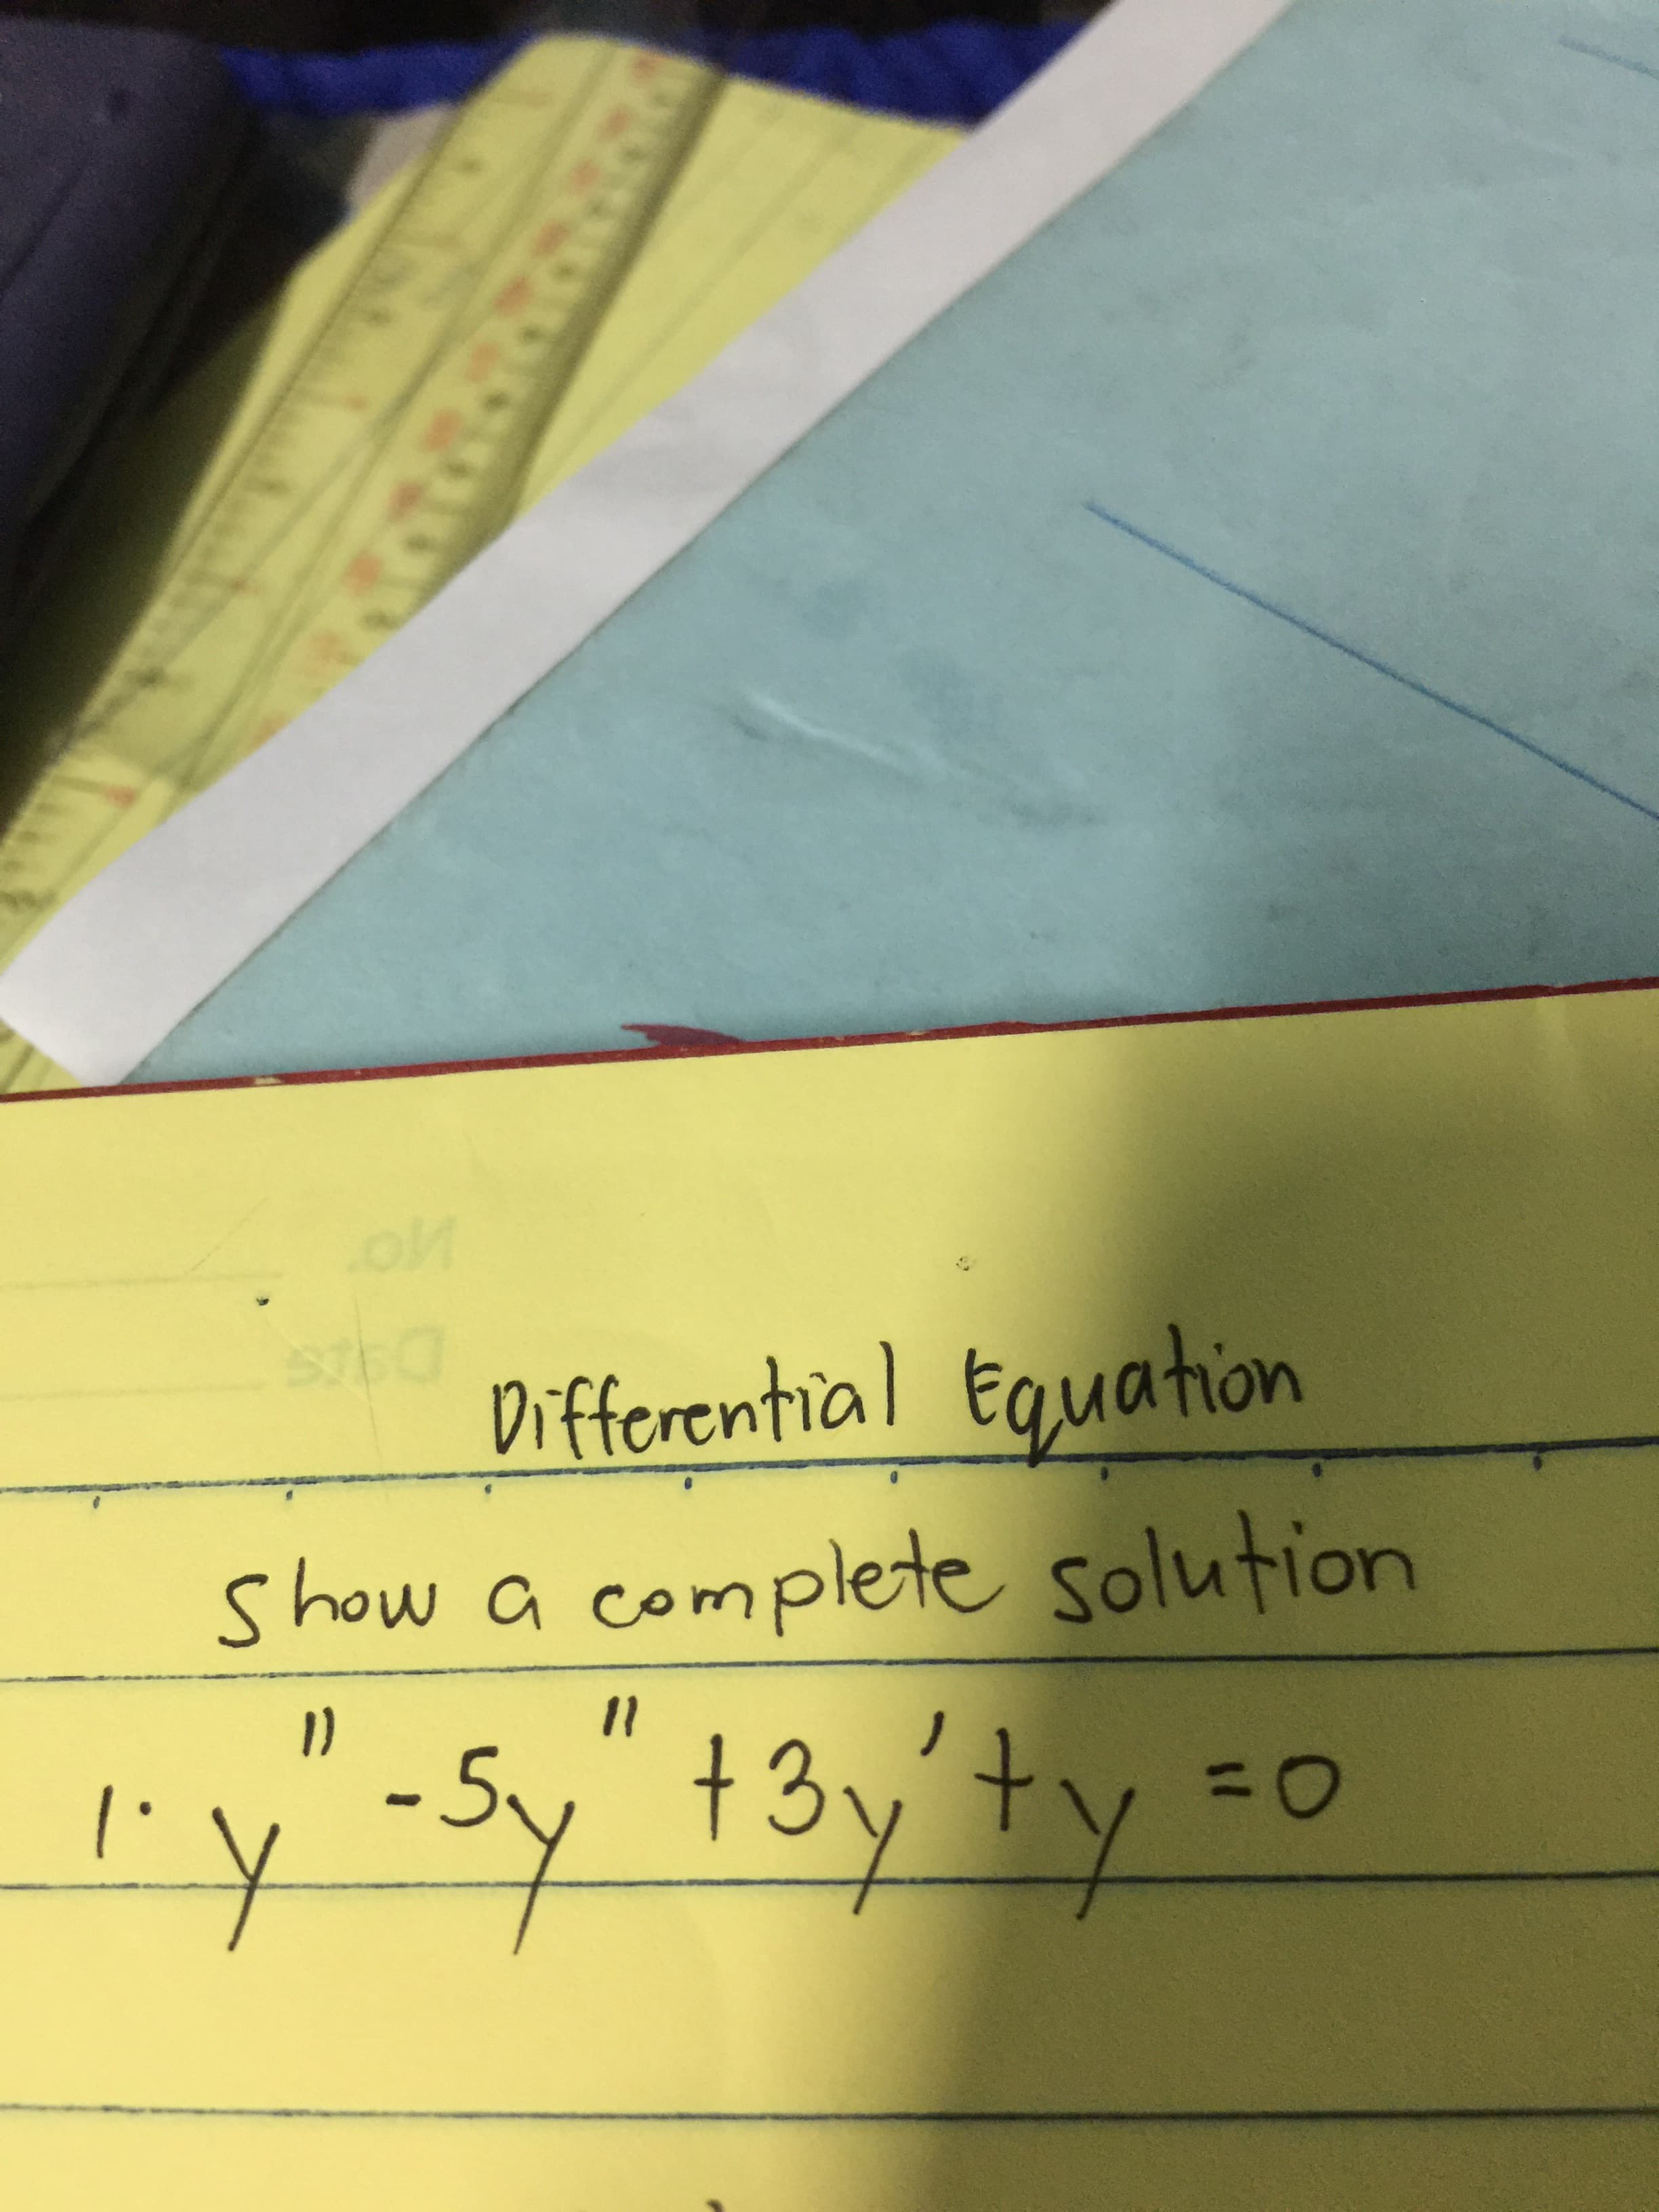 oM
Differential Equation
Show a complete solution
ySy 13yty
=0
